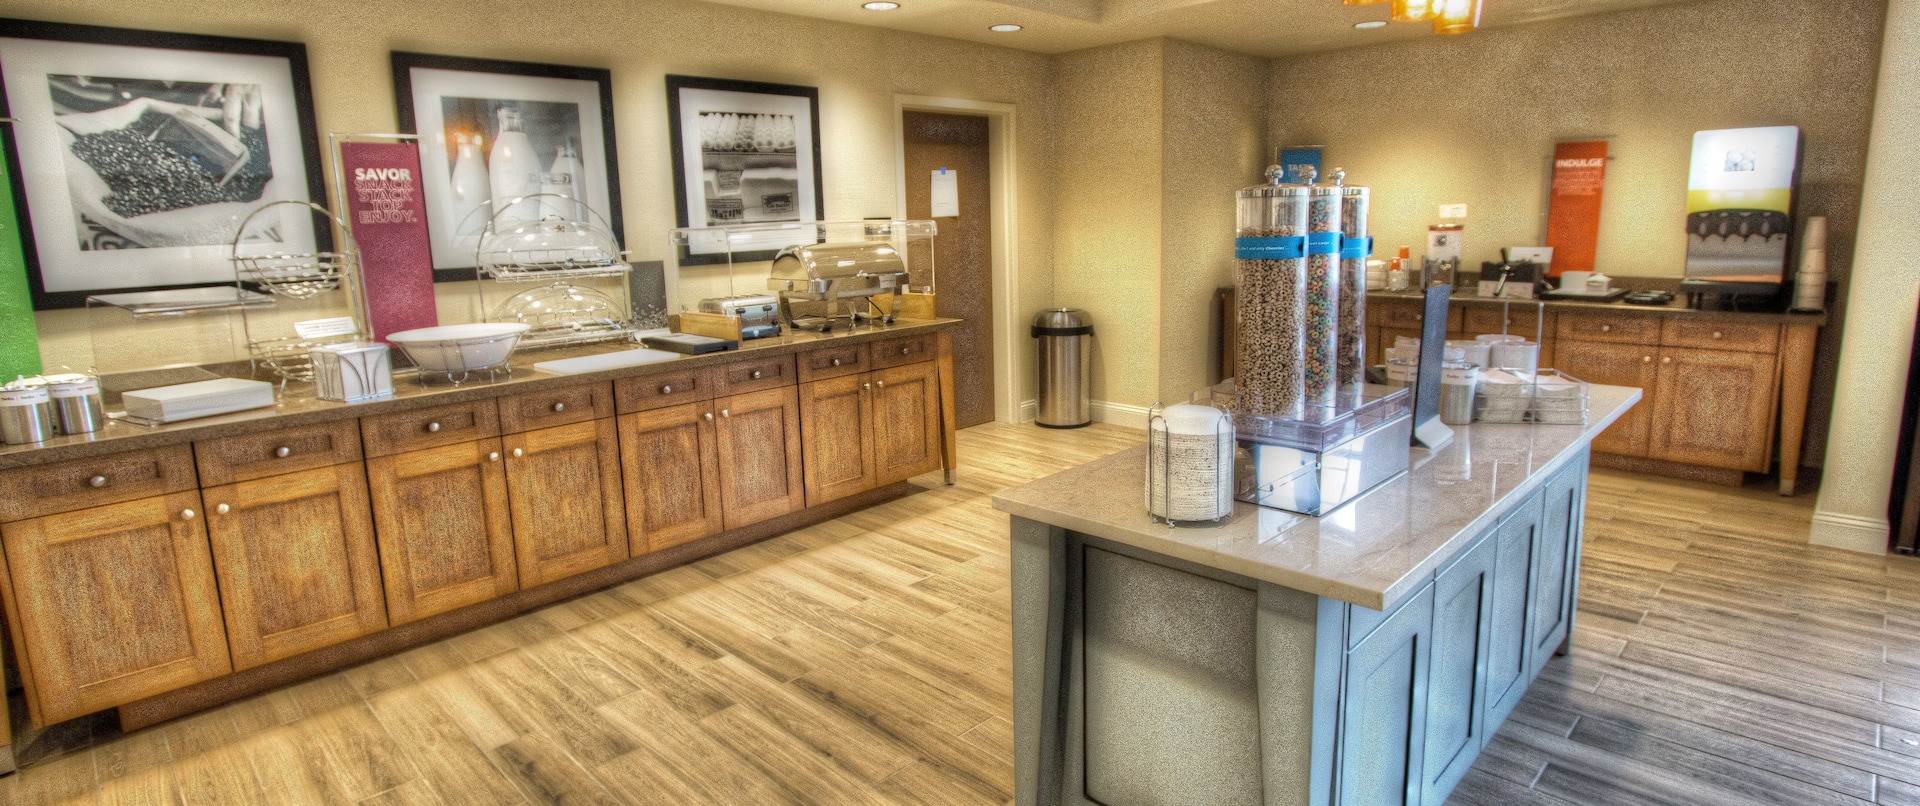 Breakfast Buffet Area and Coffee Station